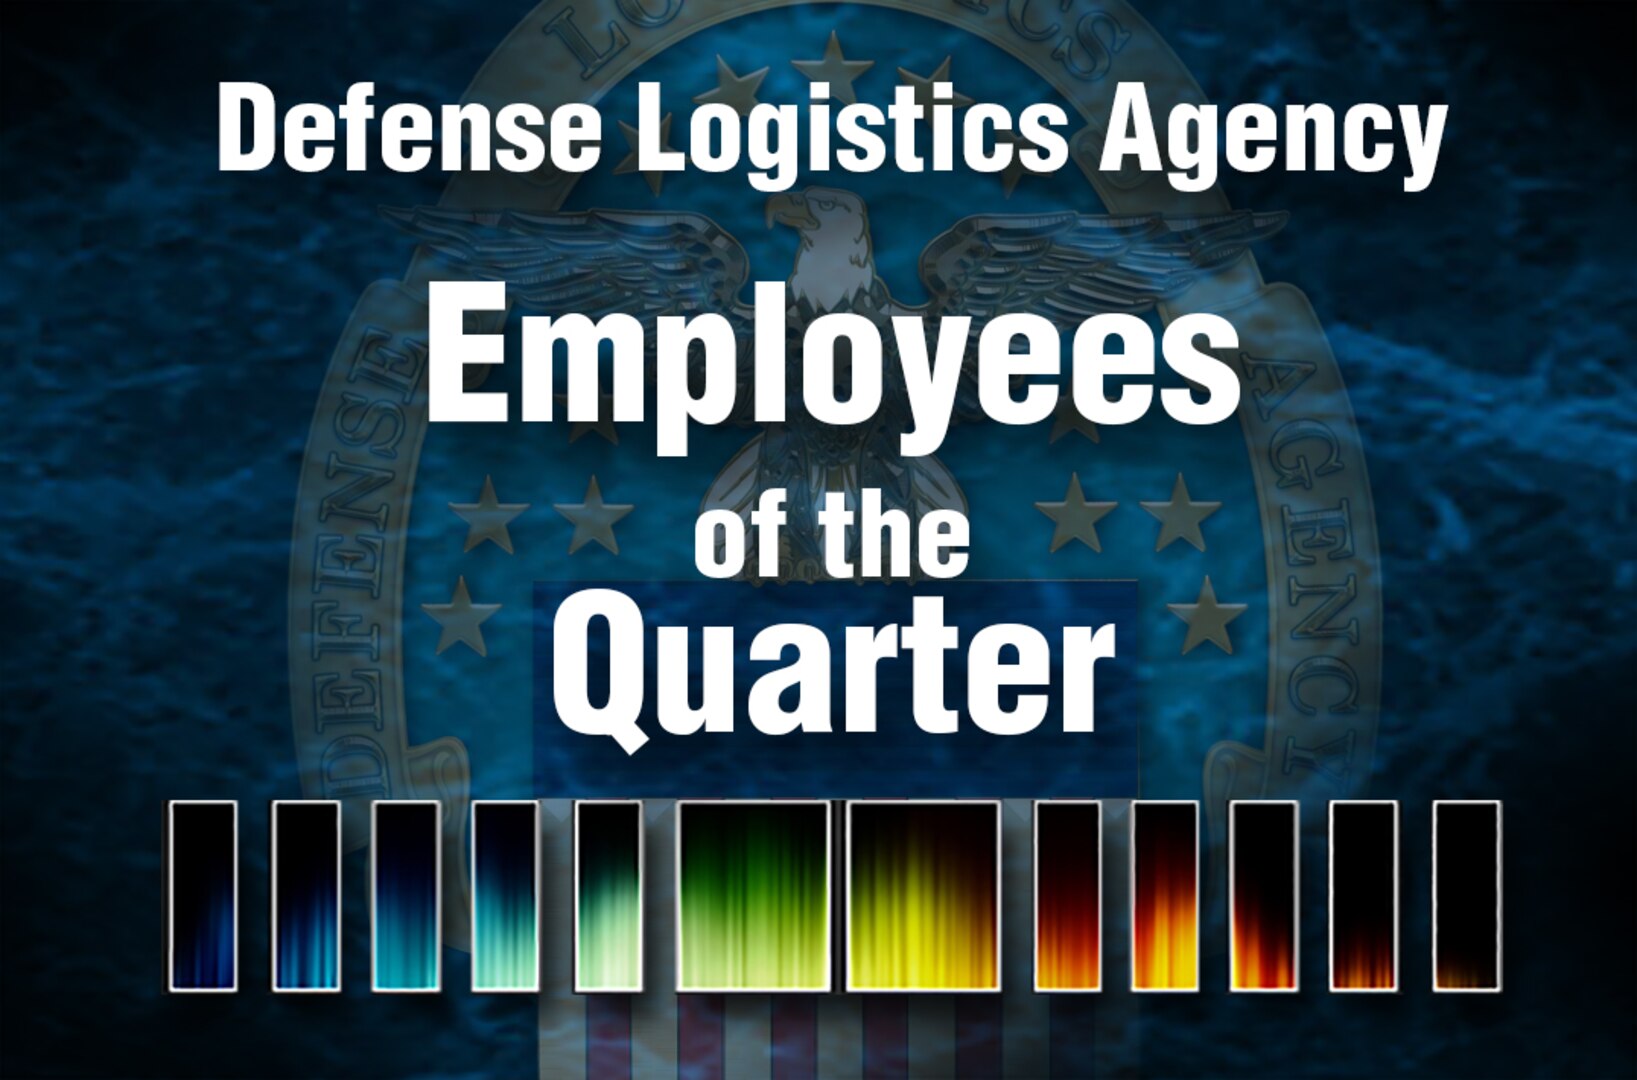 Lula A. Lacy, a management support assistant for DLA Distribution; Ian G. Ladner, an energy management specialist for DLA Energy; and Edward G. Guthrie, deputy director of DLA Energy’s Defense Fuel Support Point Okinawa, are the DLA Employees of the Quarter winners for the 1st Quarter of fiscal 2016.